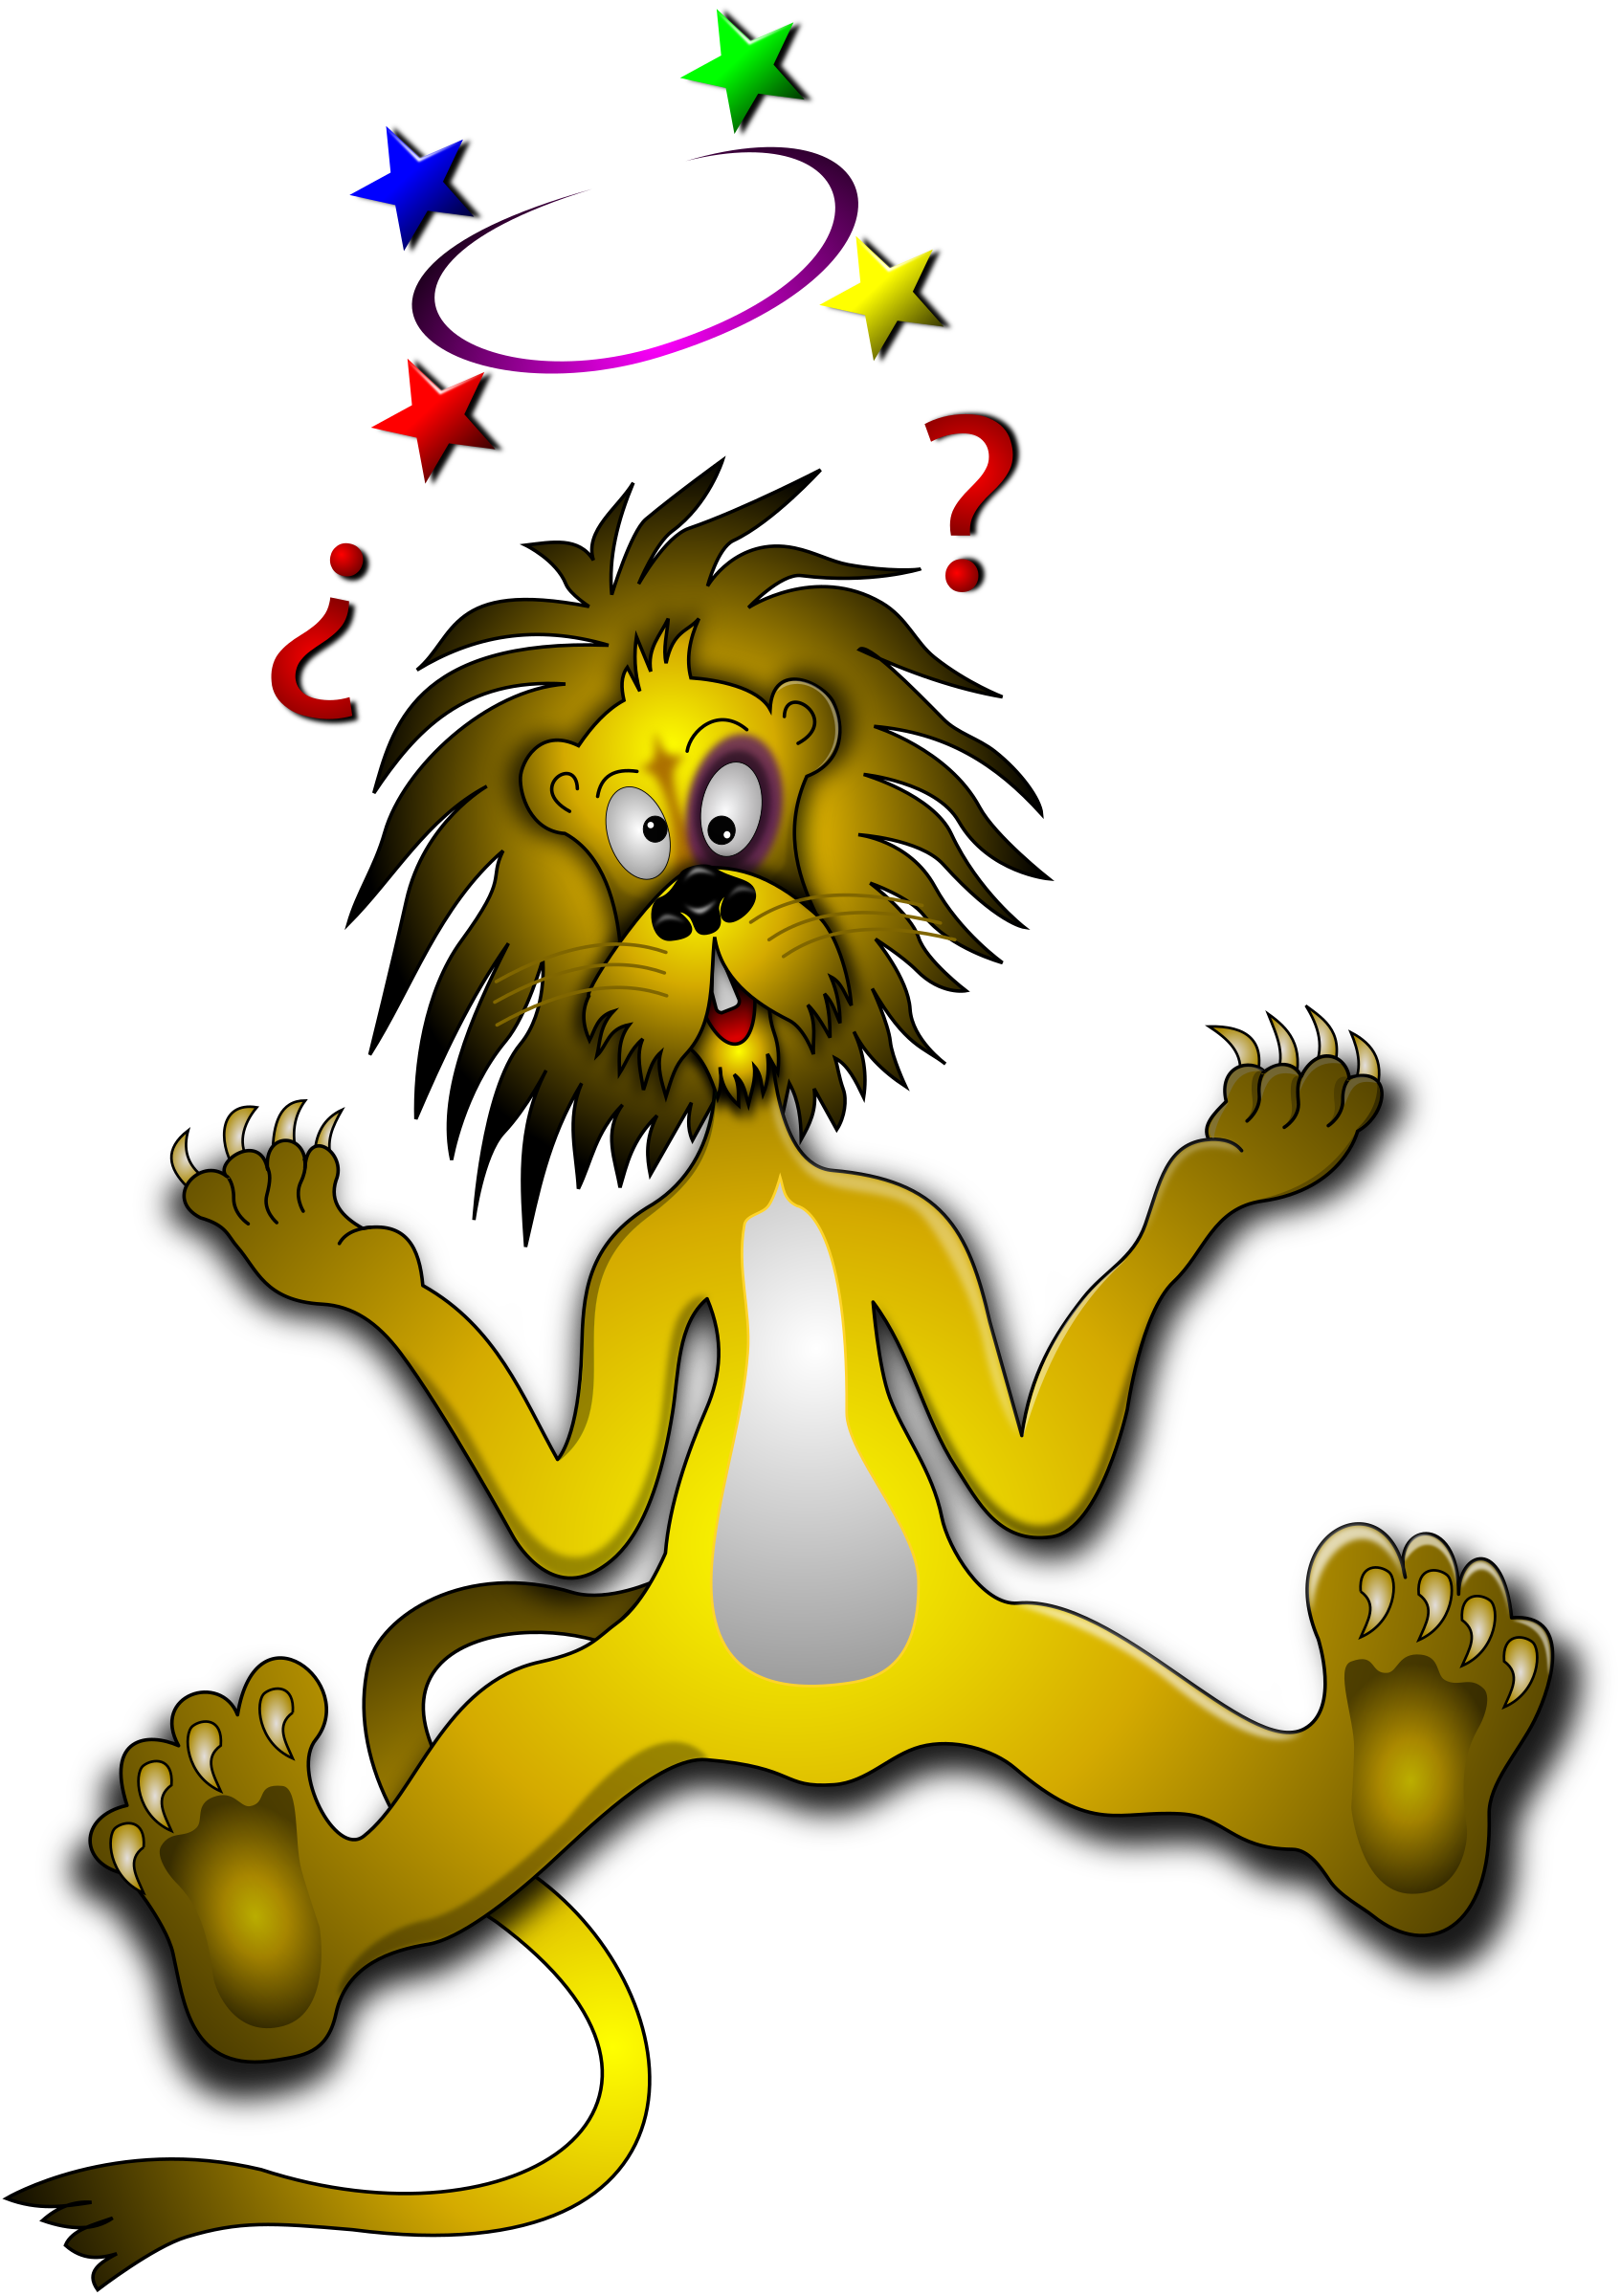 With black eye big. Hand clipart lion